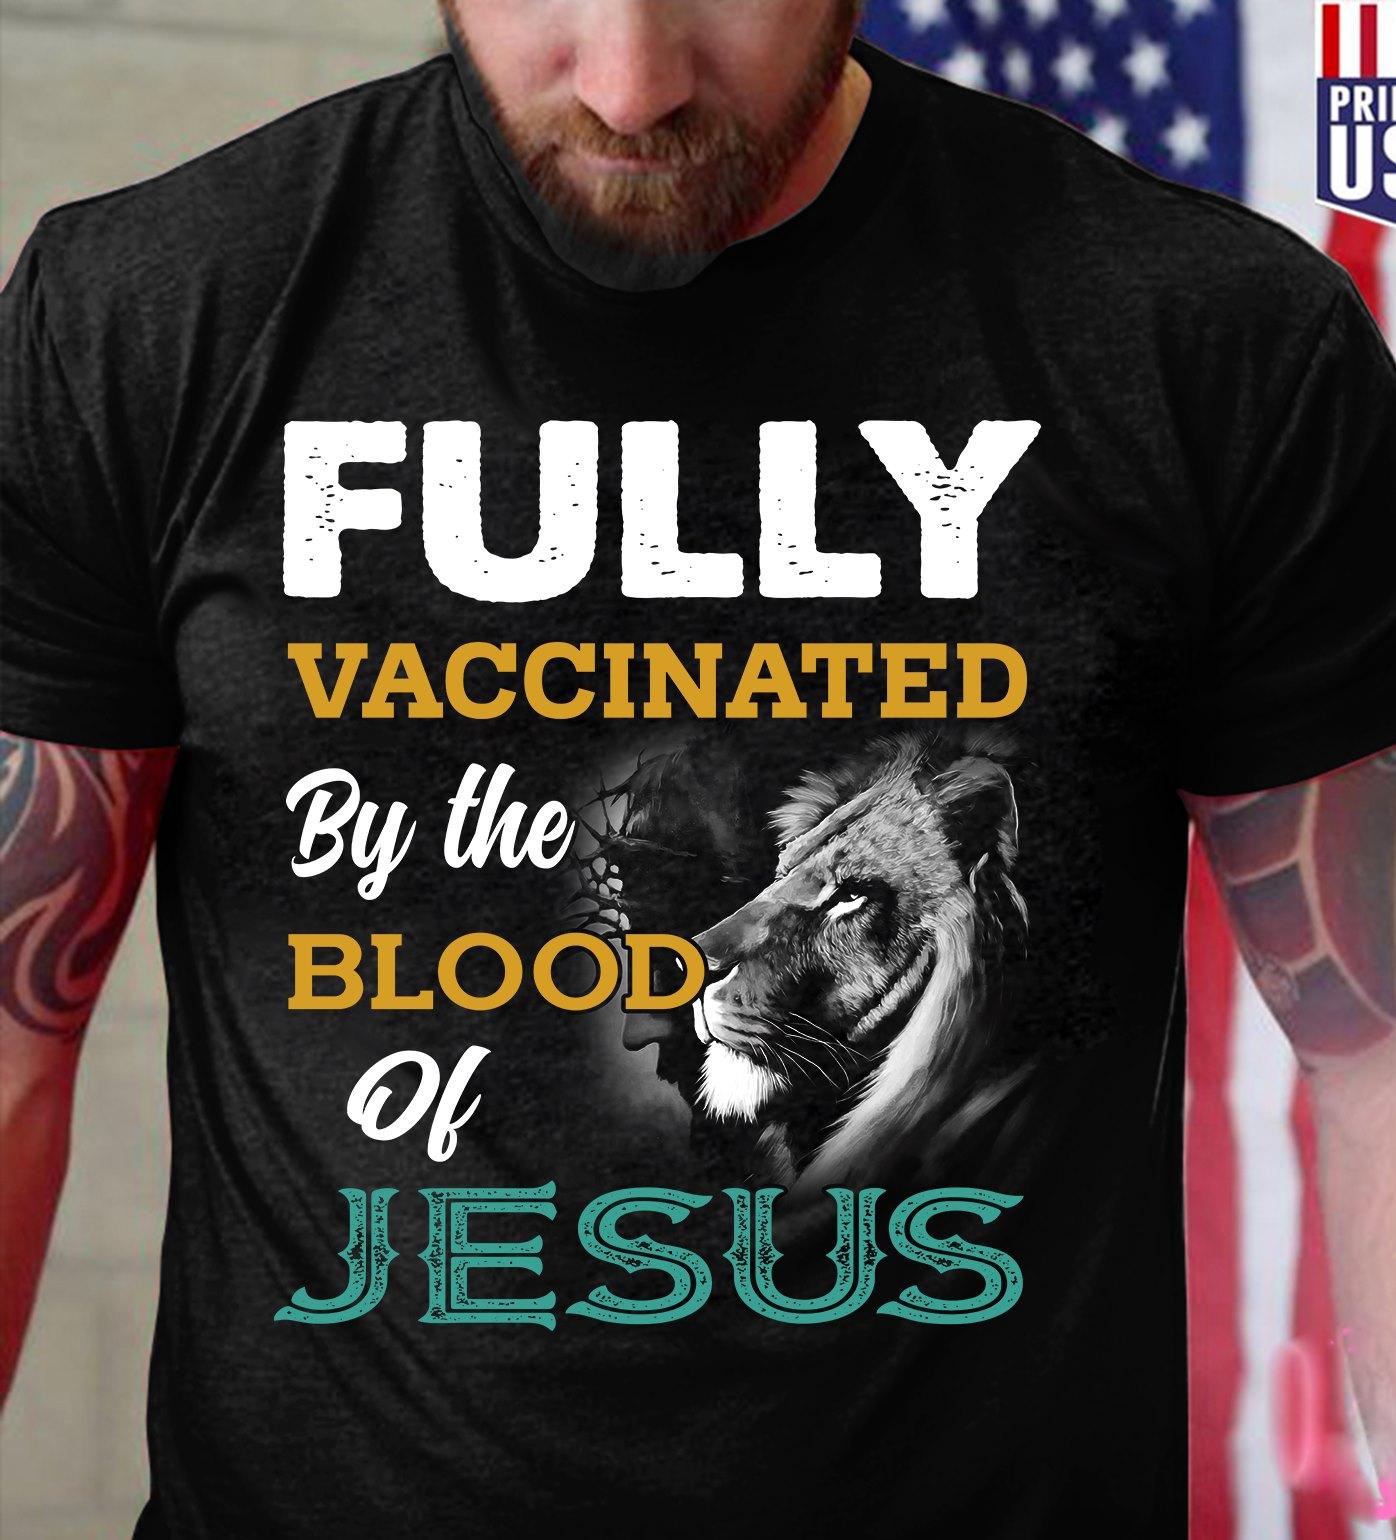 Fully vaccinated by the blood of Jesus - Jesus the god, Believe in Jesus